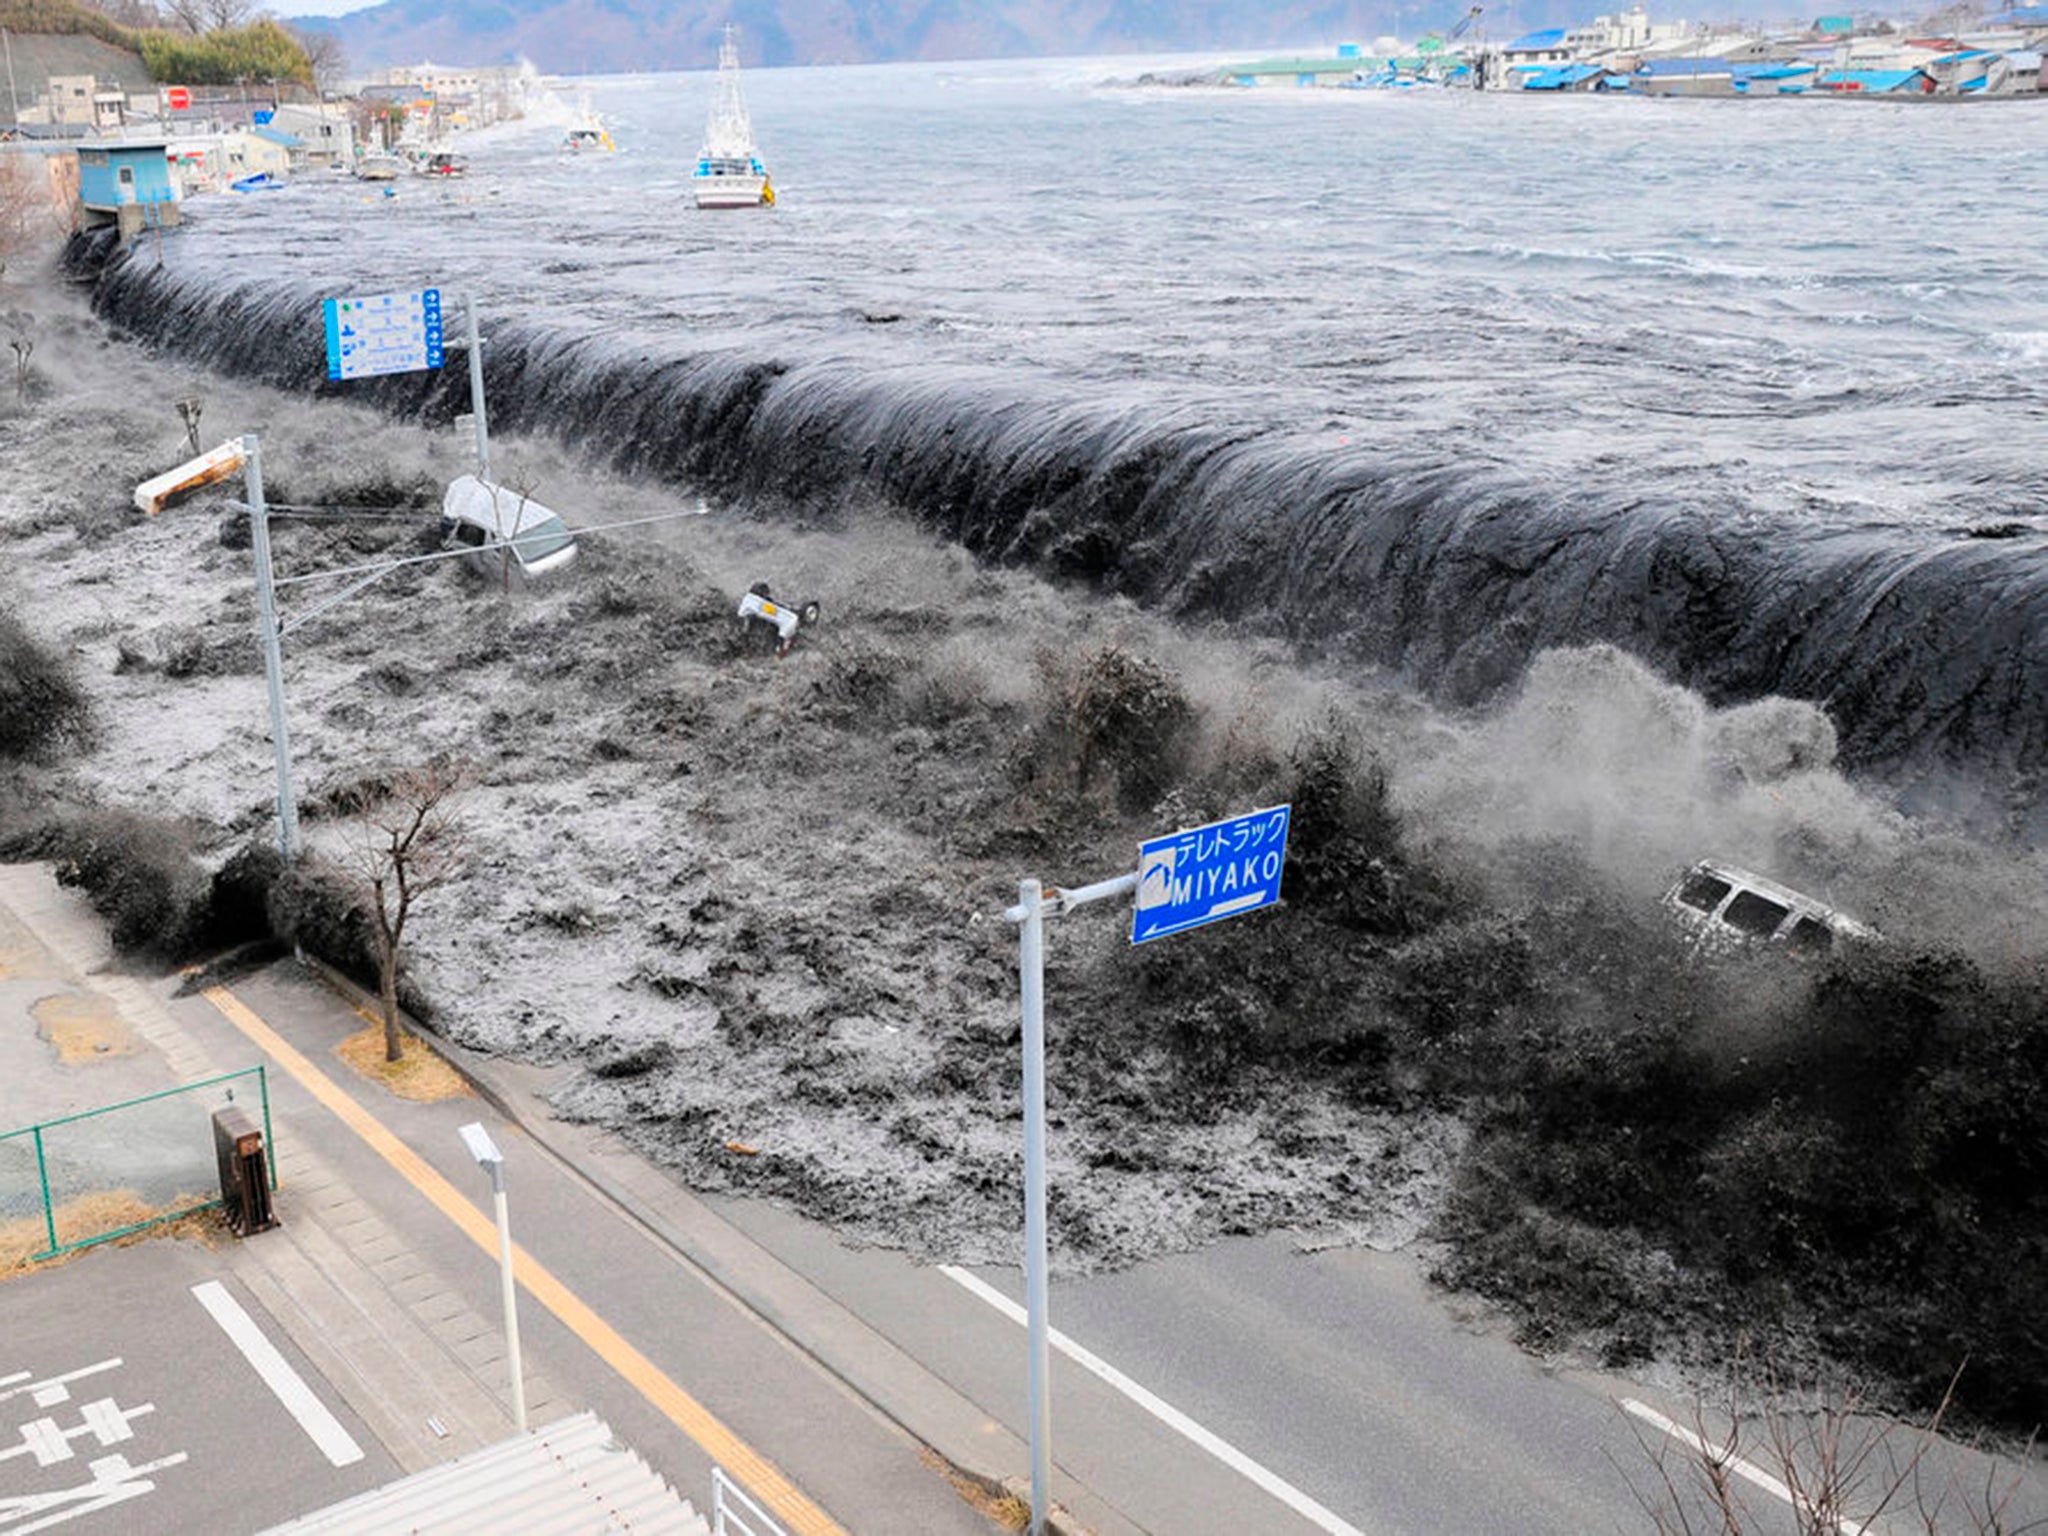 Waves in the Japanese tsumani reached 20 metres high